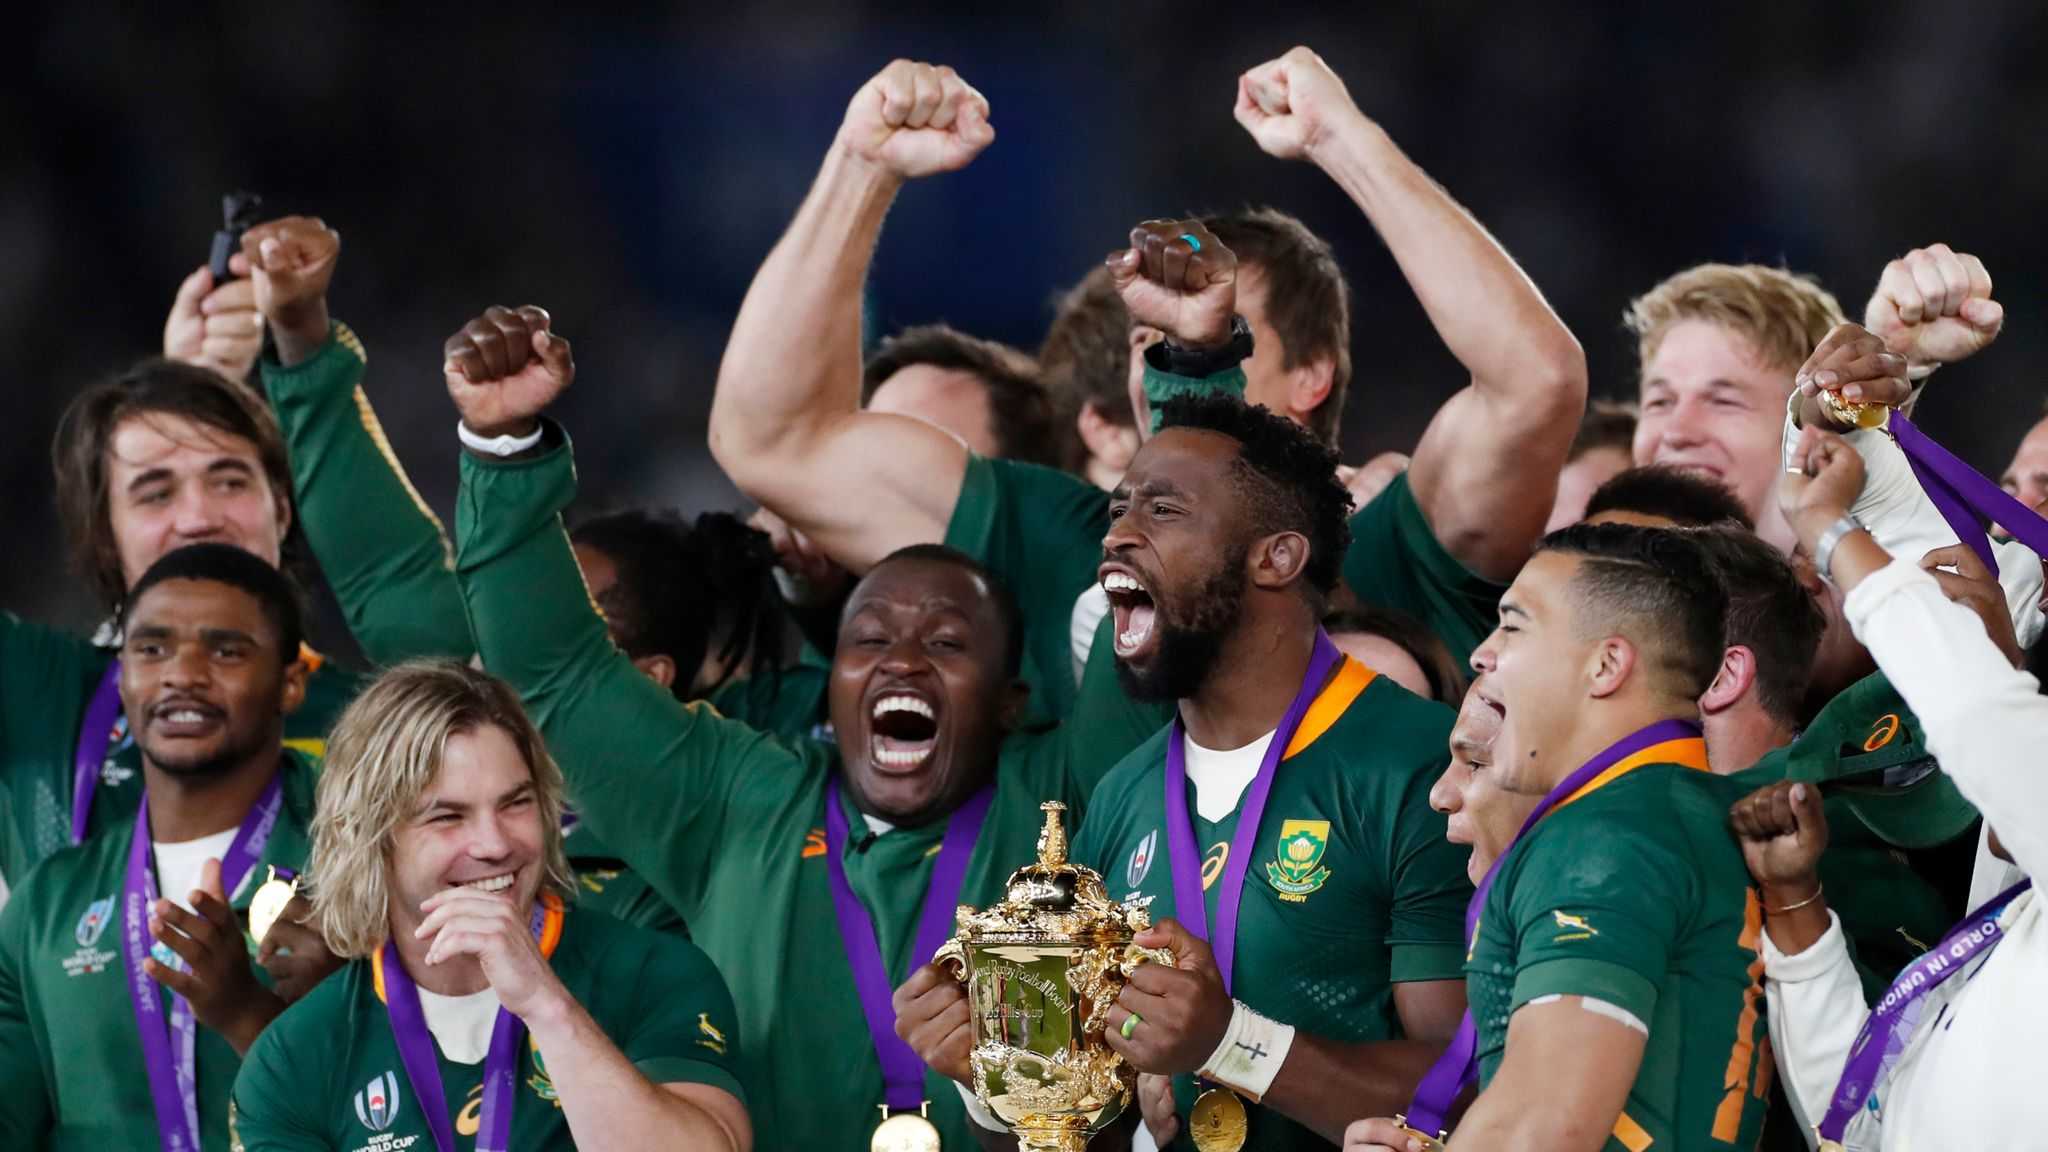 Rugby World Cup final Heartbreak for England as South Africa win 3212